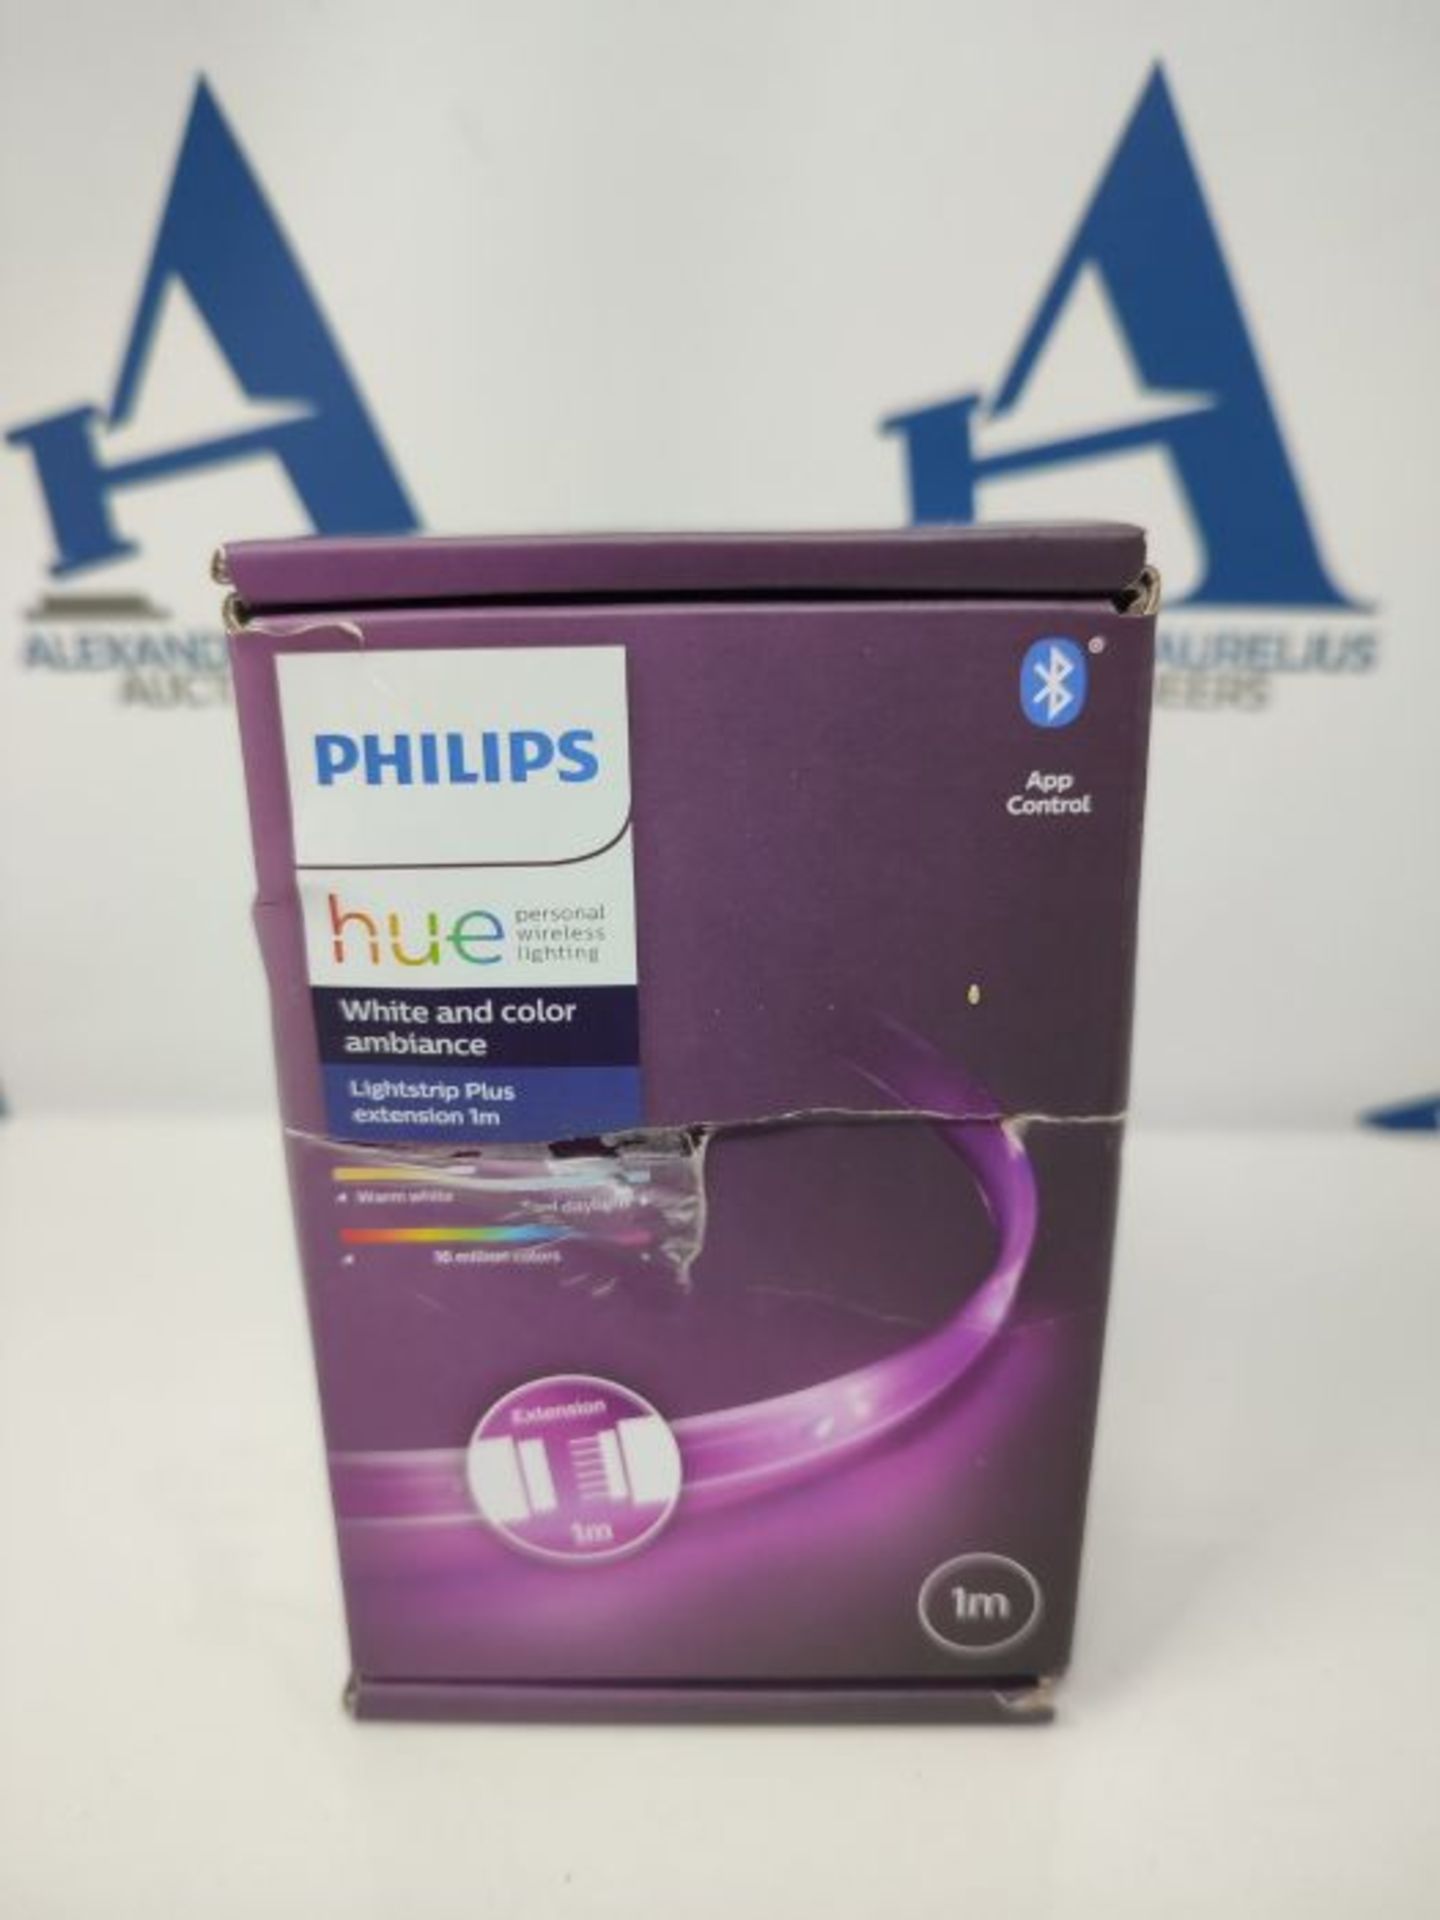 Philips Hue White & Color Ambiance Indoor LightStrips+ 1m extension et rallonge - Image 2 of 3